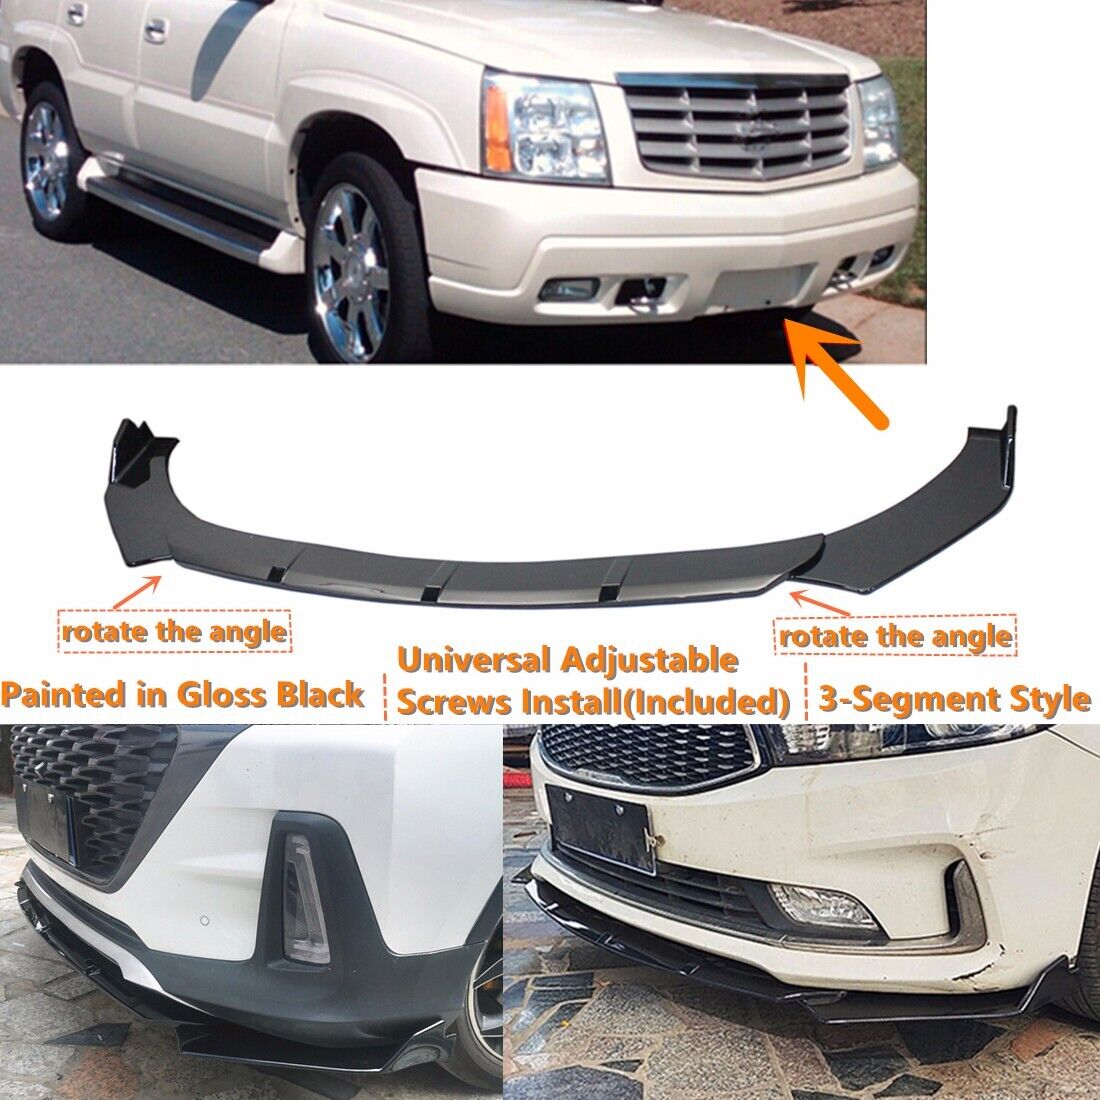 Add-on Universal For 2002-2006 Cadillac Escalade Front Bumper Lip Splitter Kit